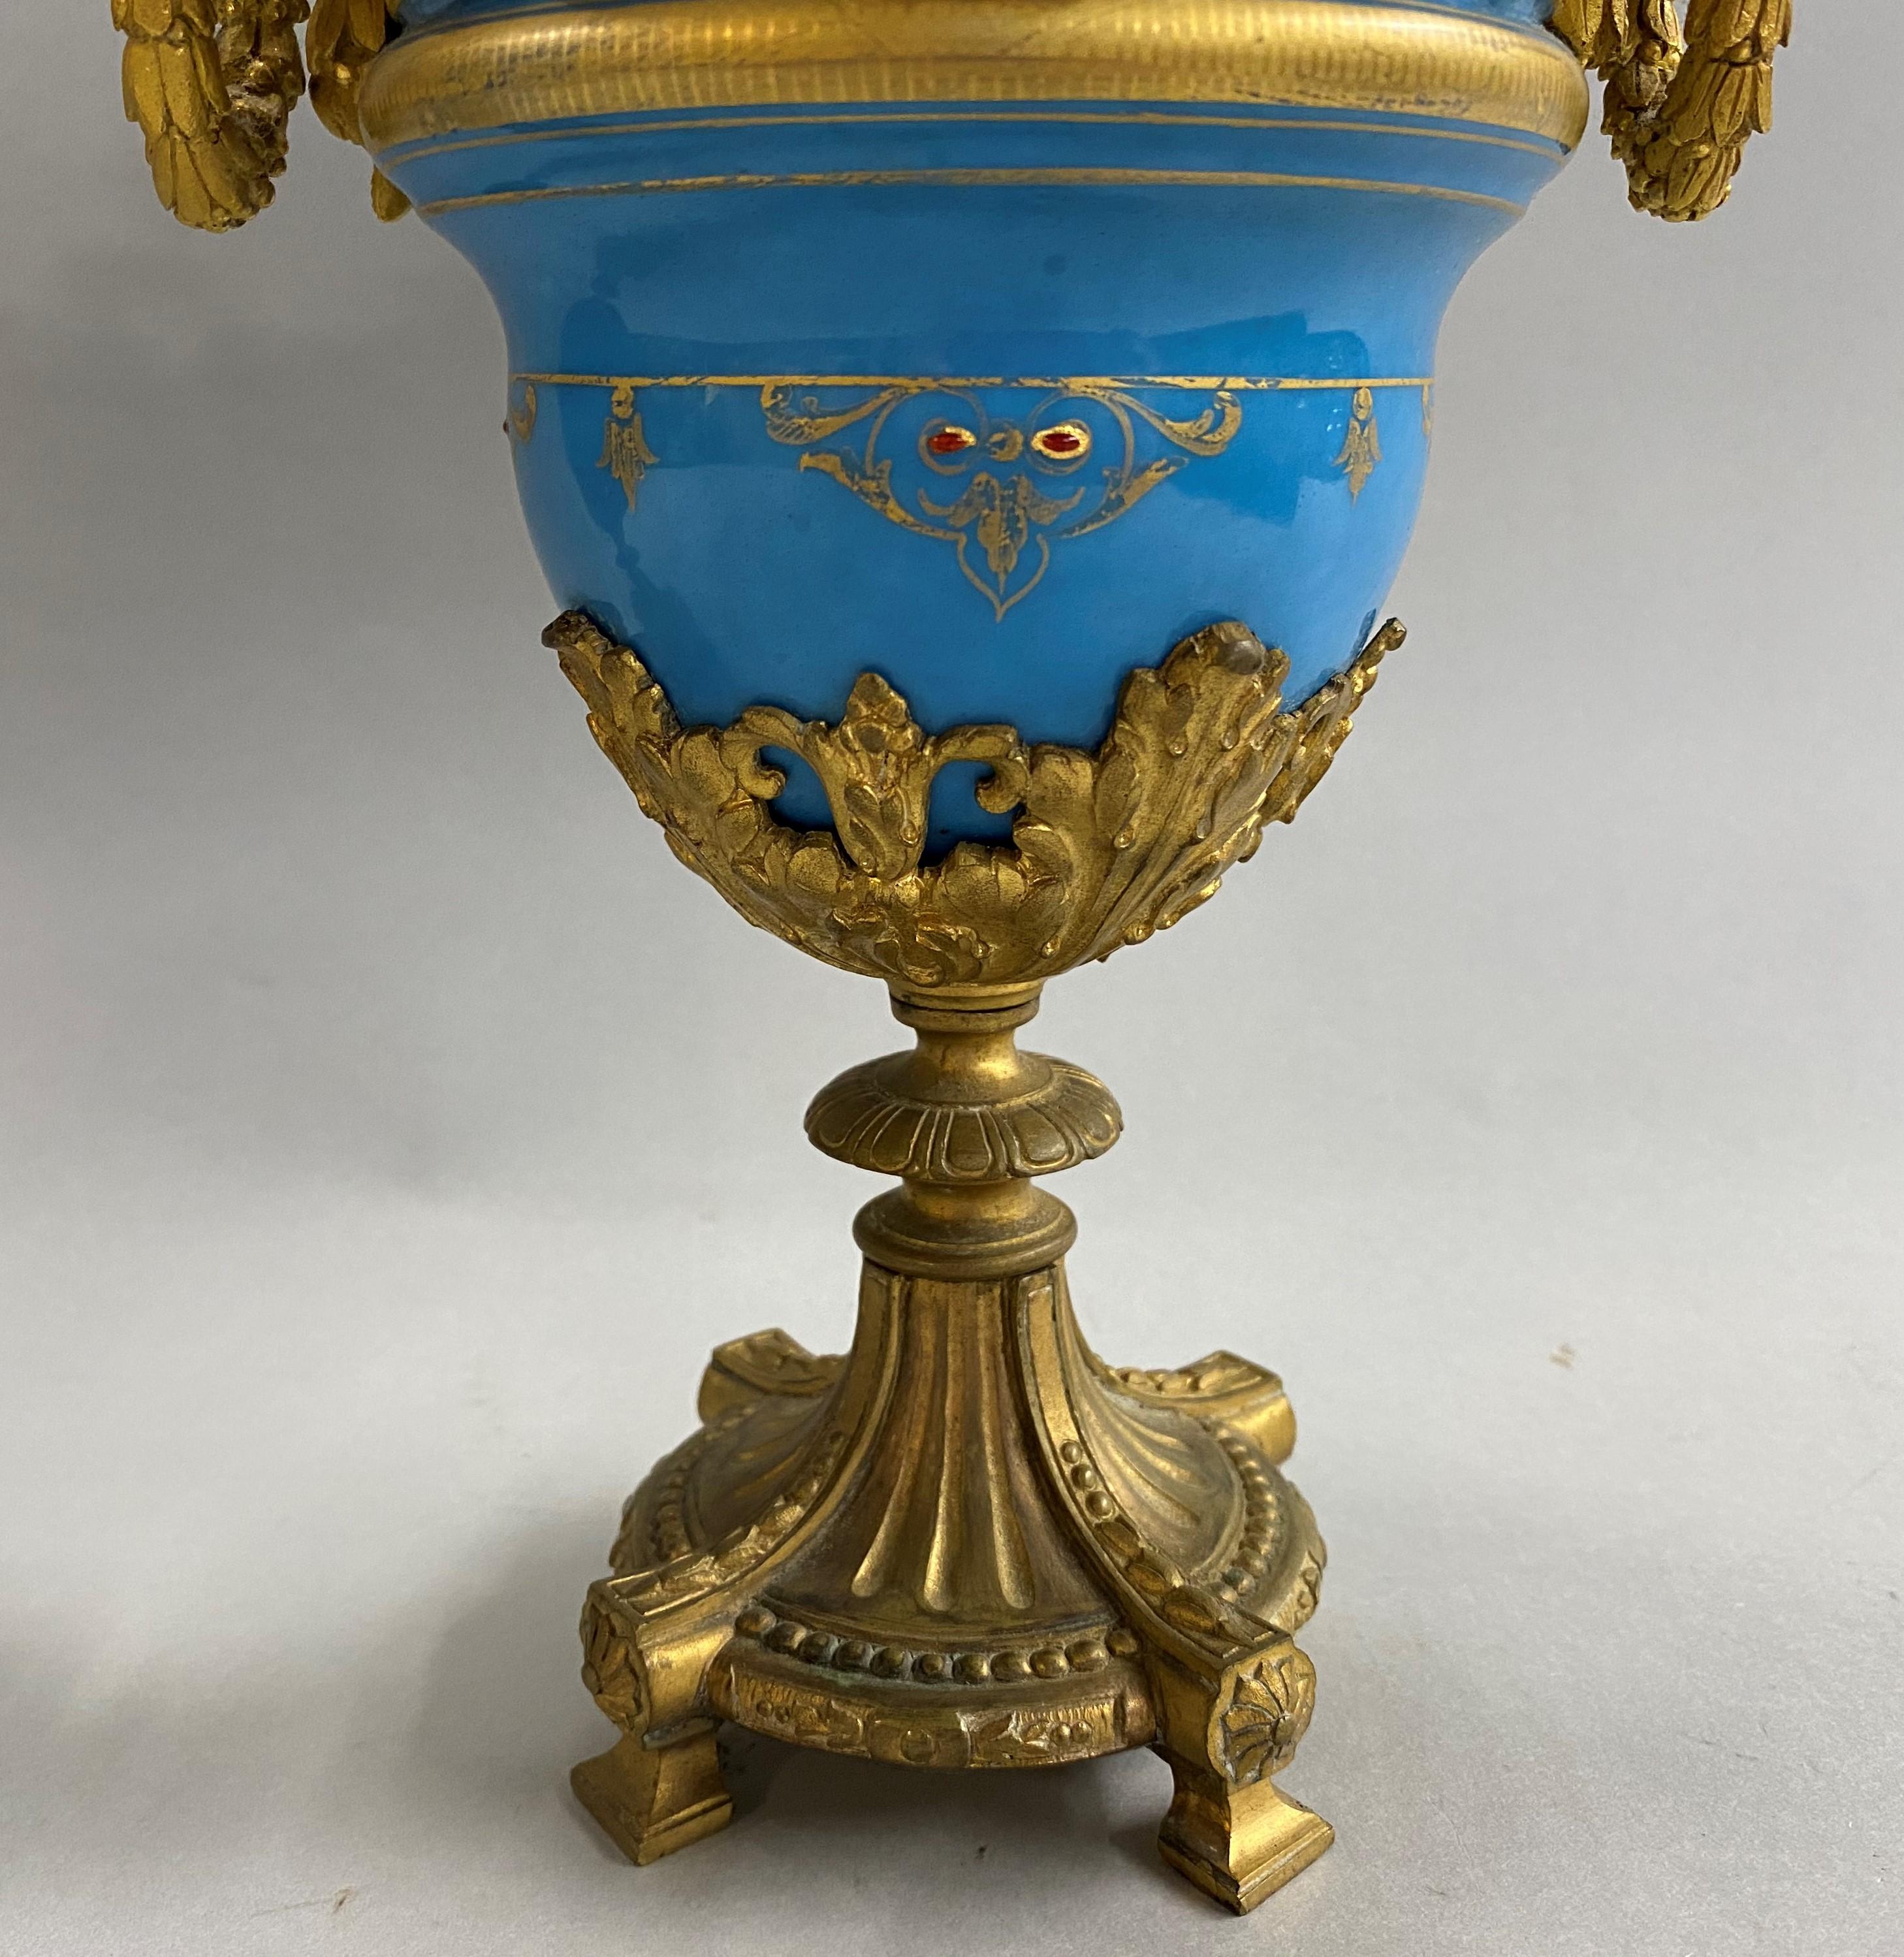 19th Century Pair of French Sevres Celeste Blue Porcelain Urns with Gilt Ormolu 4